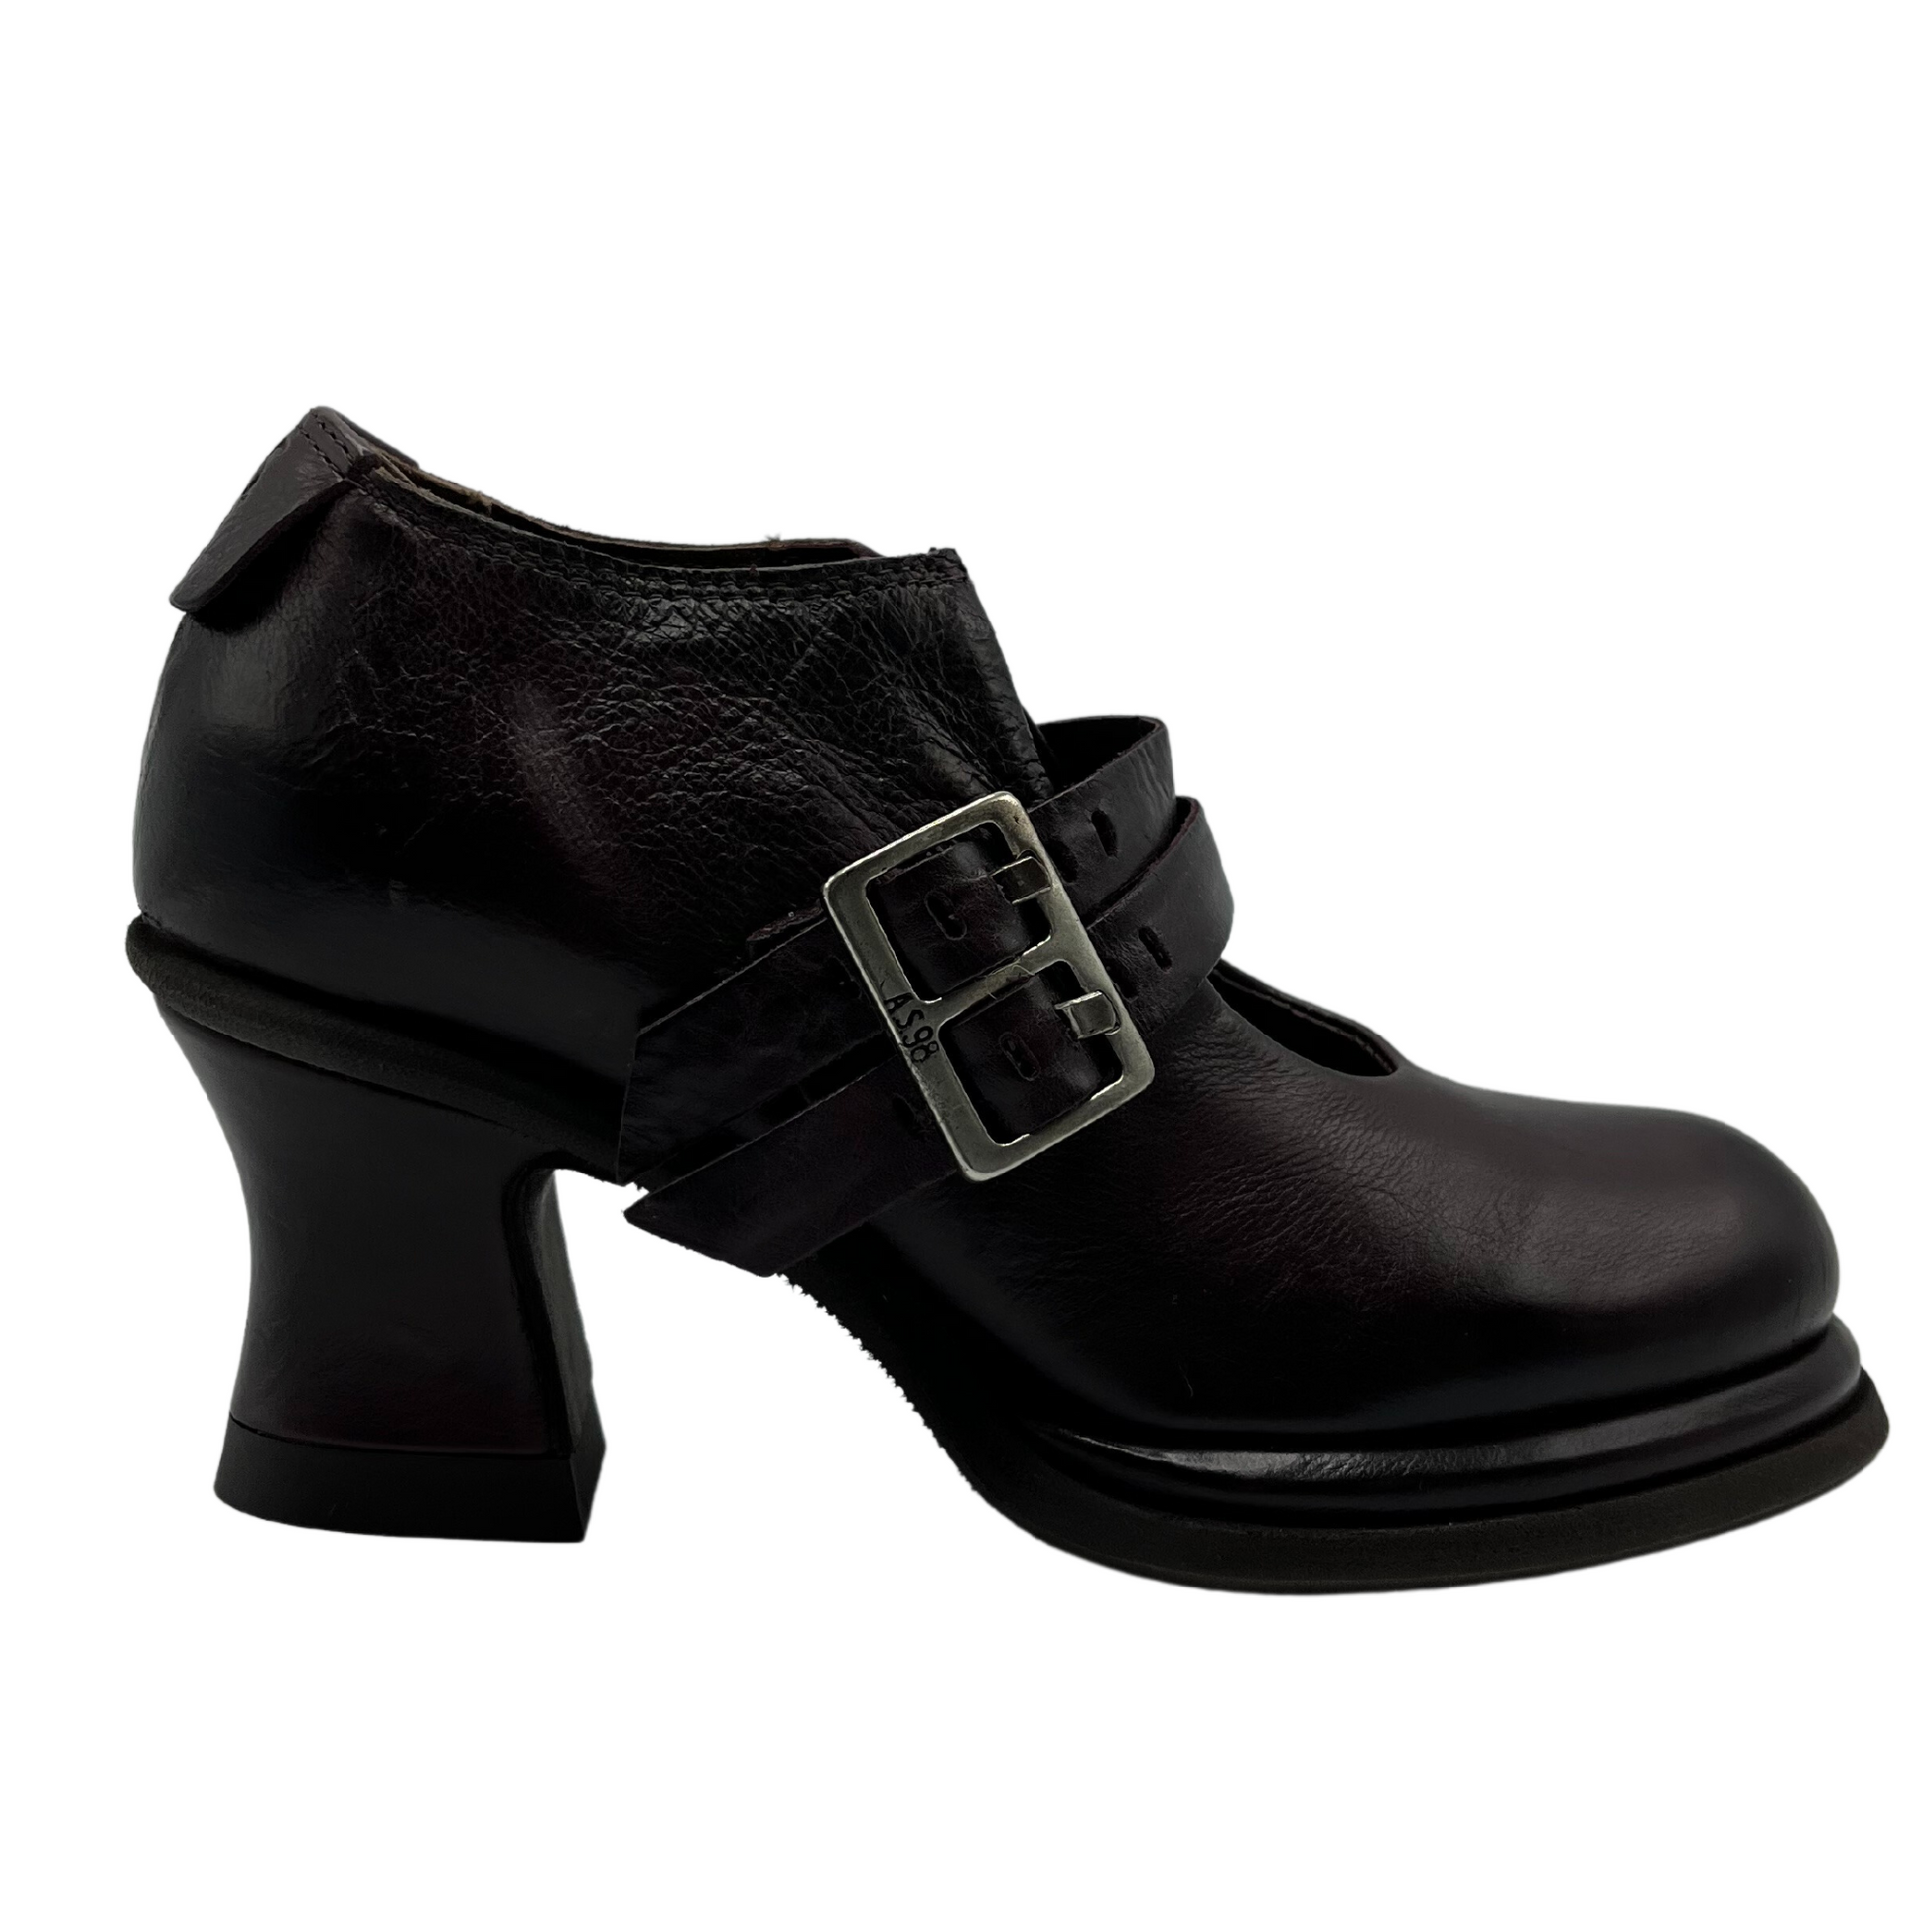 Right facing view of brown leather shoe with double buckle straps on upper and flared block heel